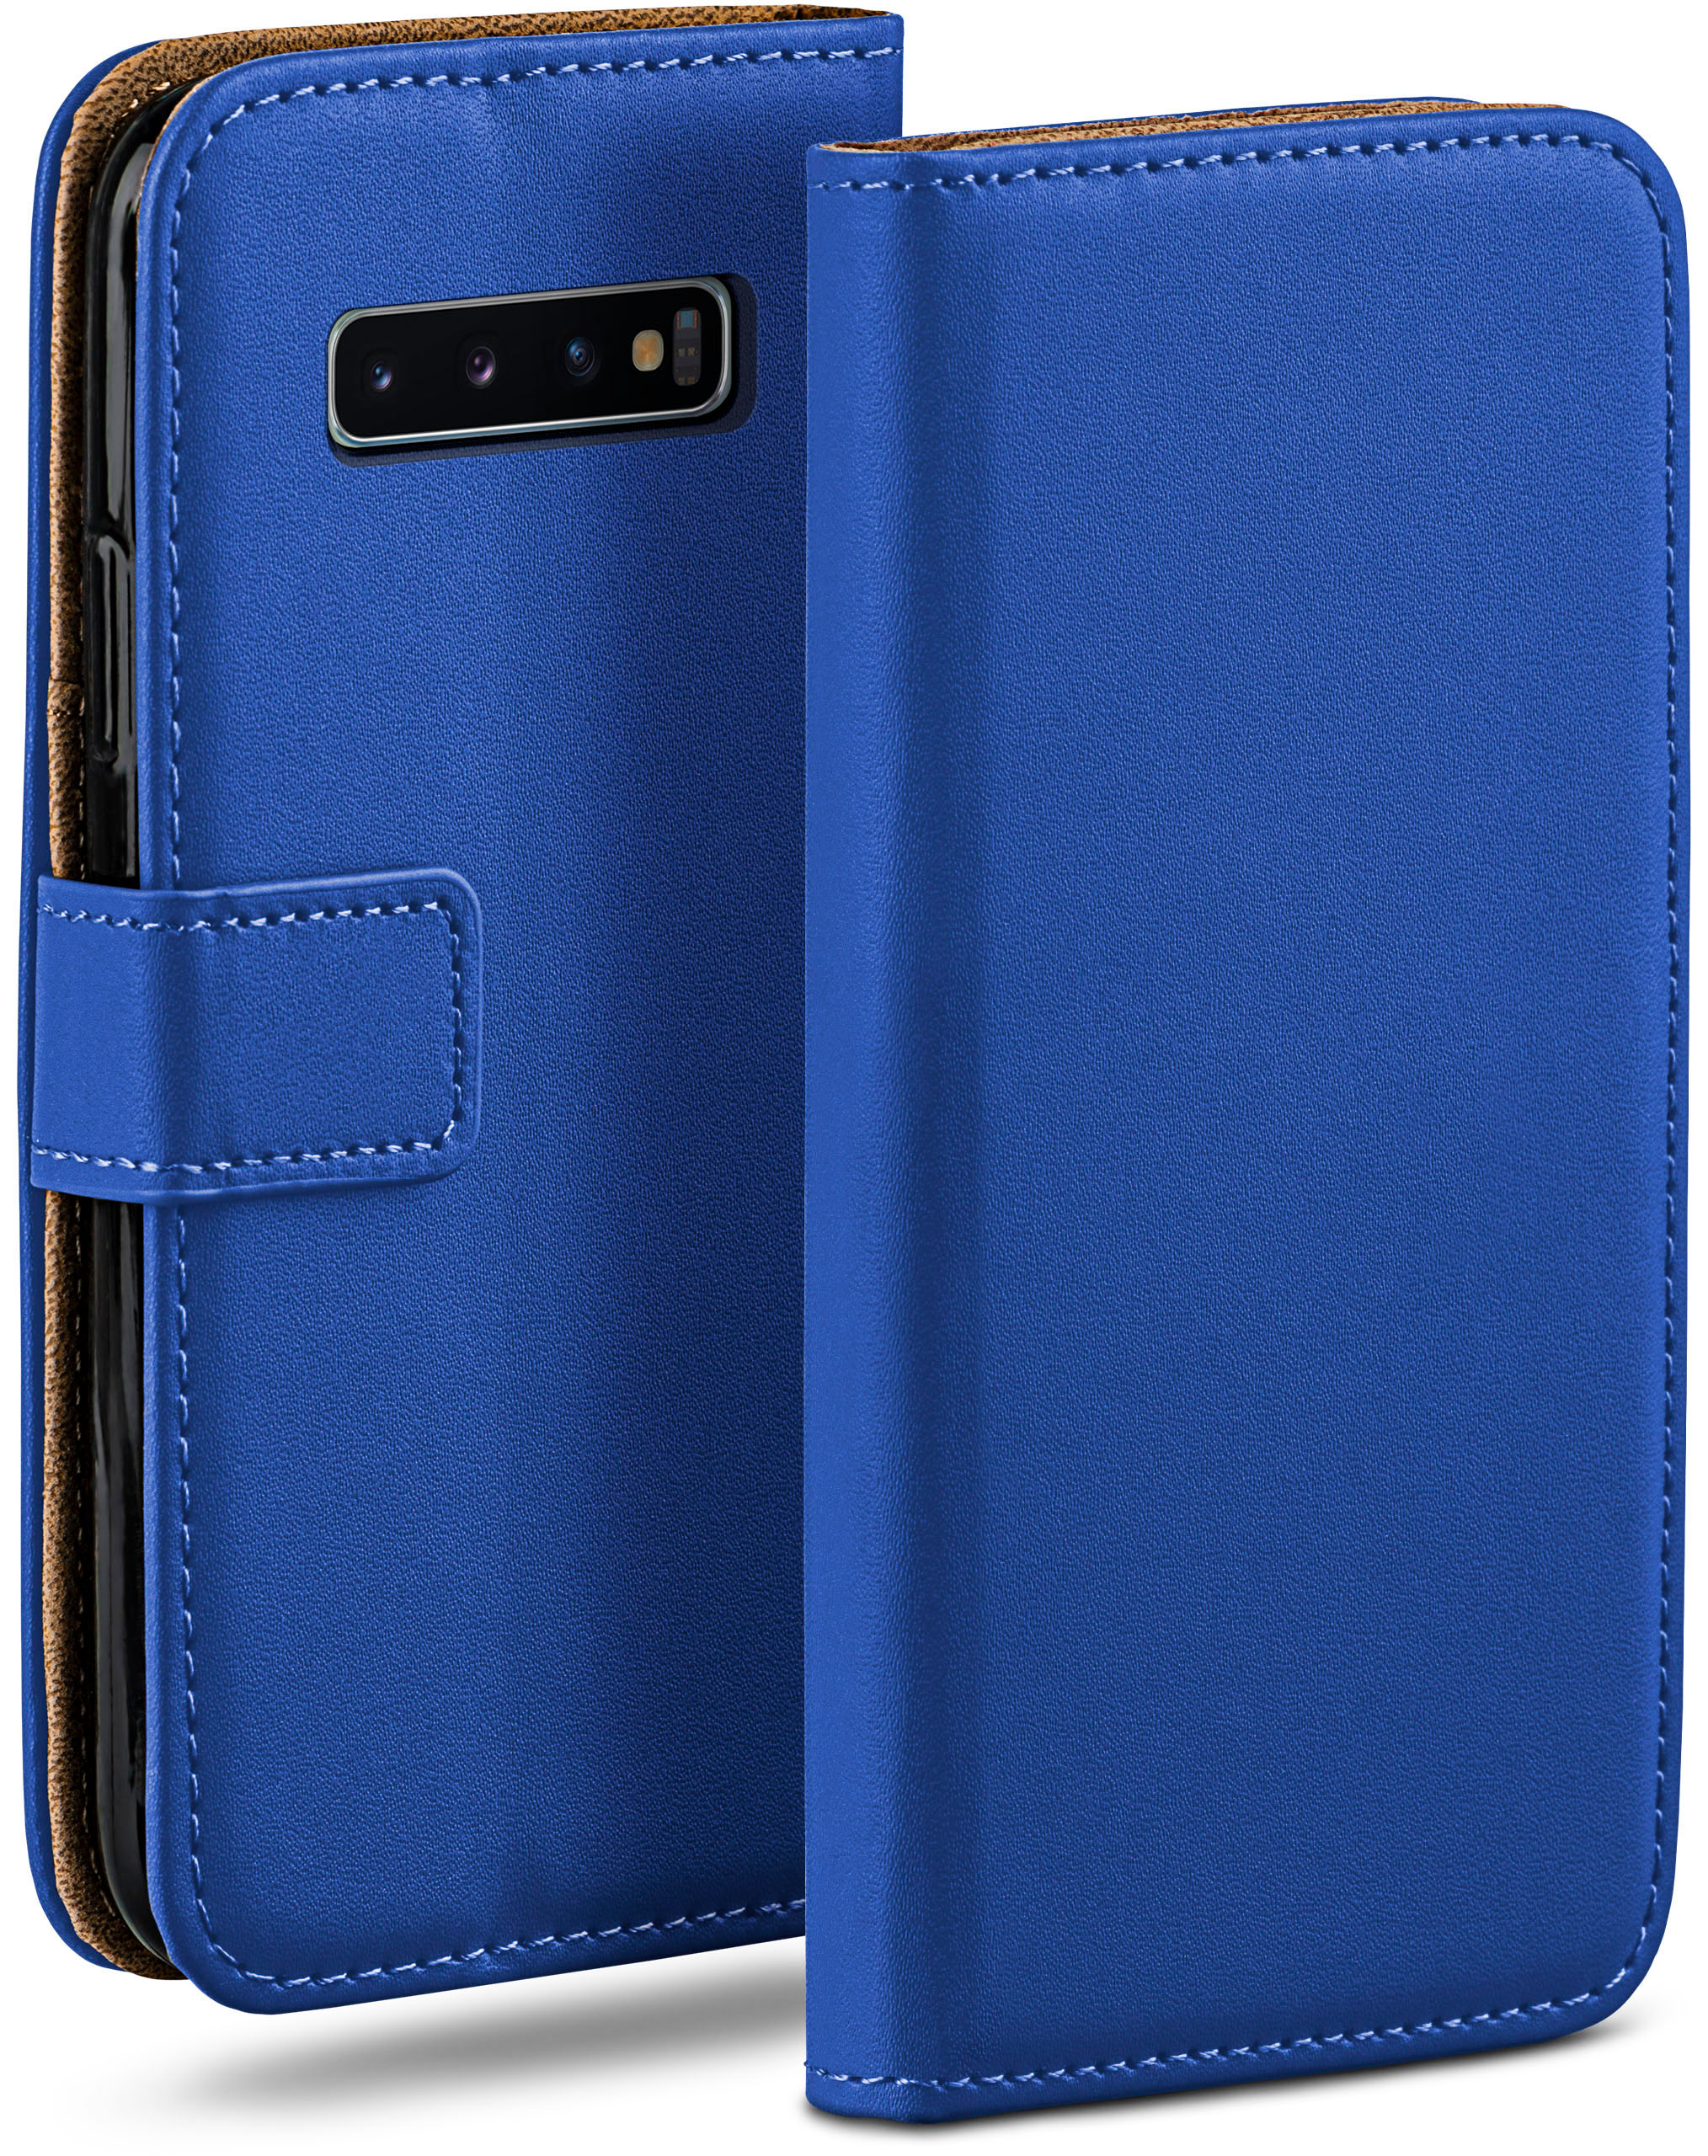 MOEX Book Royal-Blue Samsung, Bookcover, Galaxy Case, S10